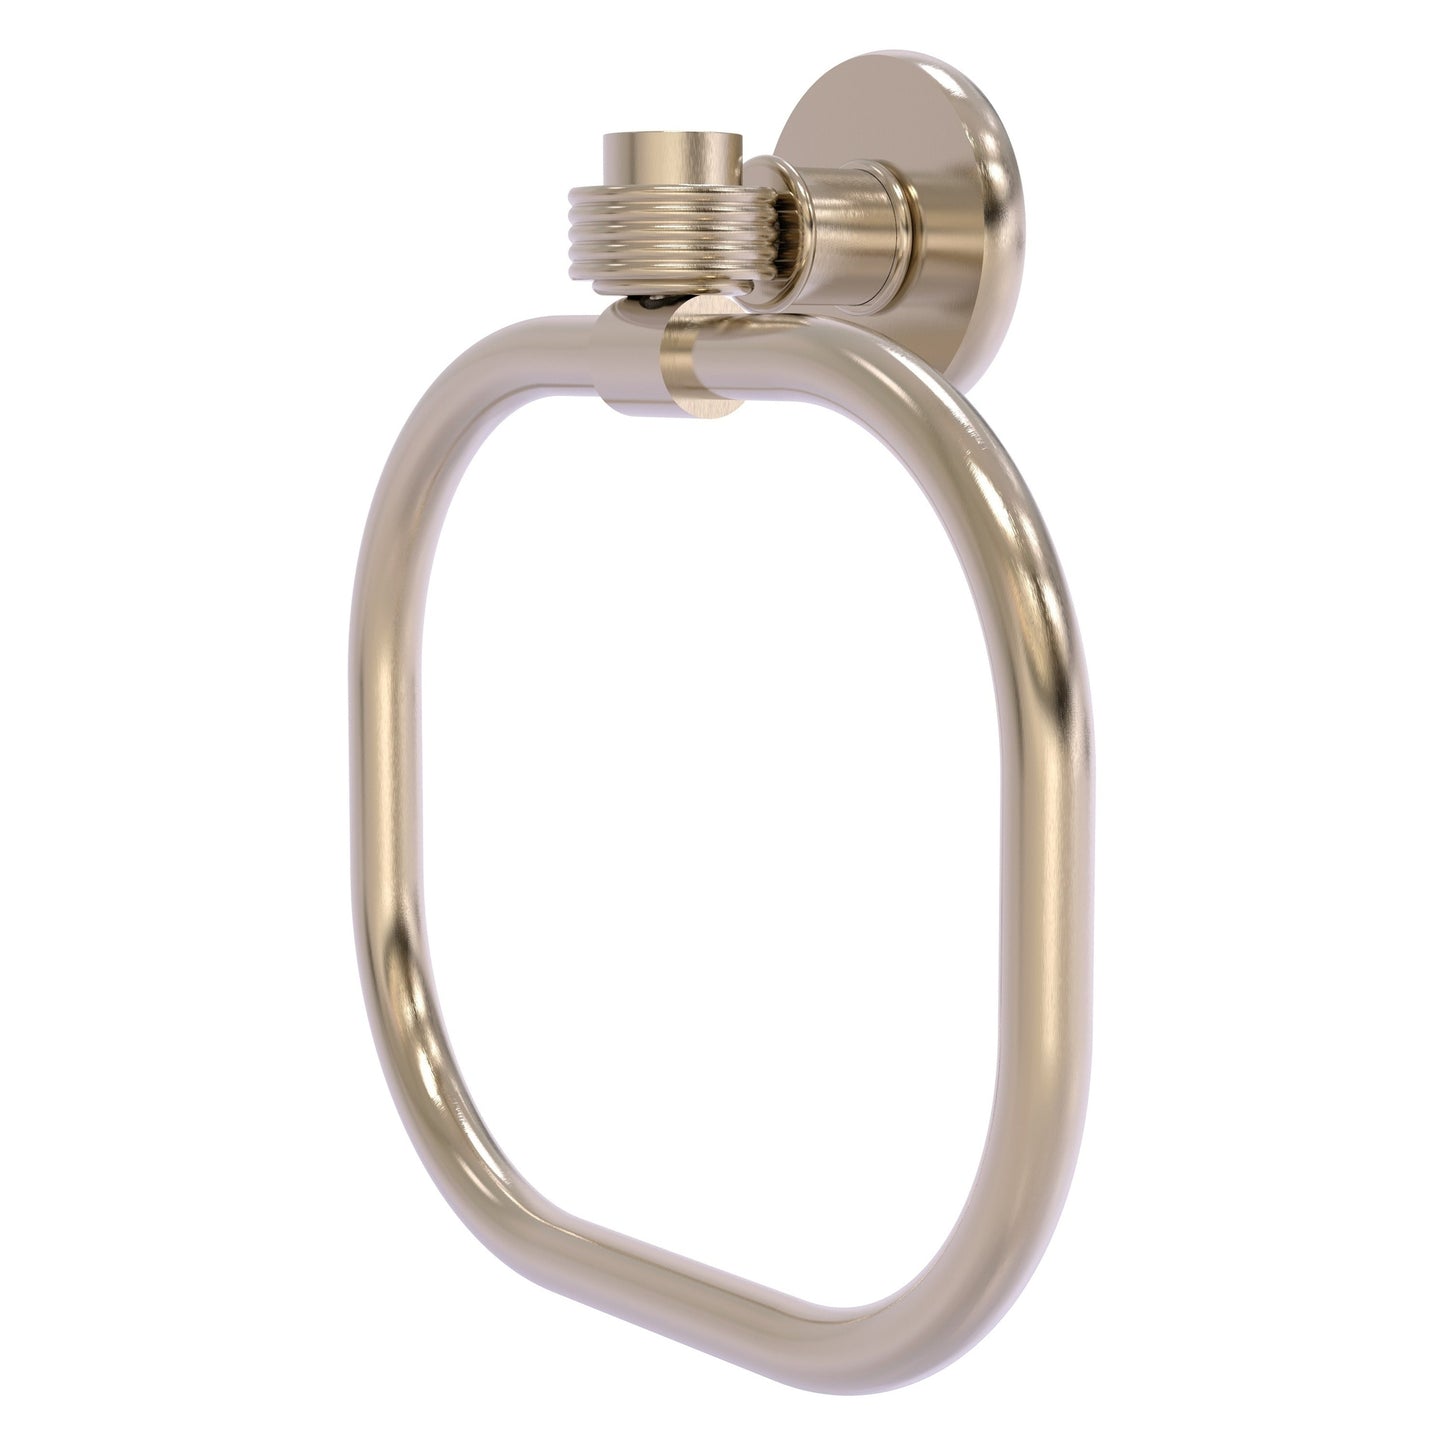 Allied Brass Skyline 2016G 9" Antique Pewter Solid Brass Towel Ring With Grooved Accents